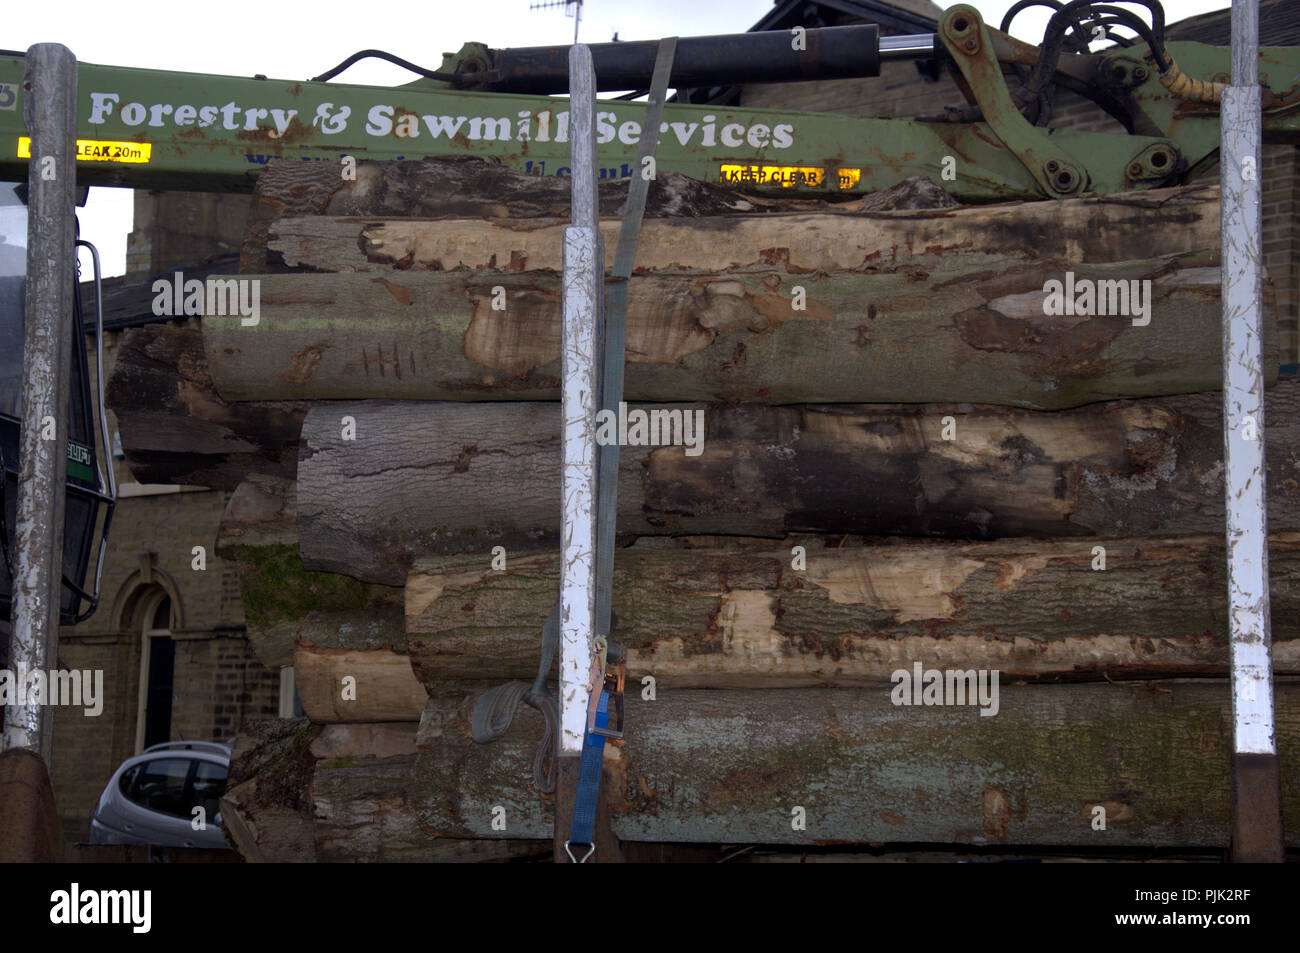 Truck carrying sawn logs of lumber in Saltaire, Yorkshire, uk Stock Photo